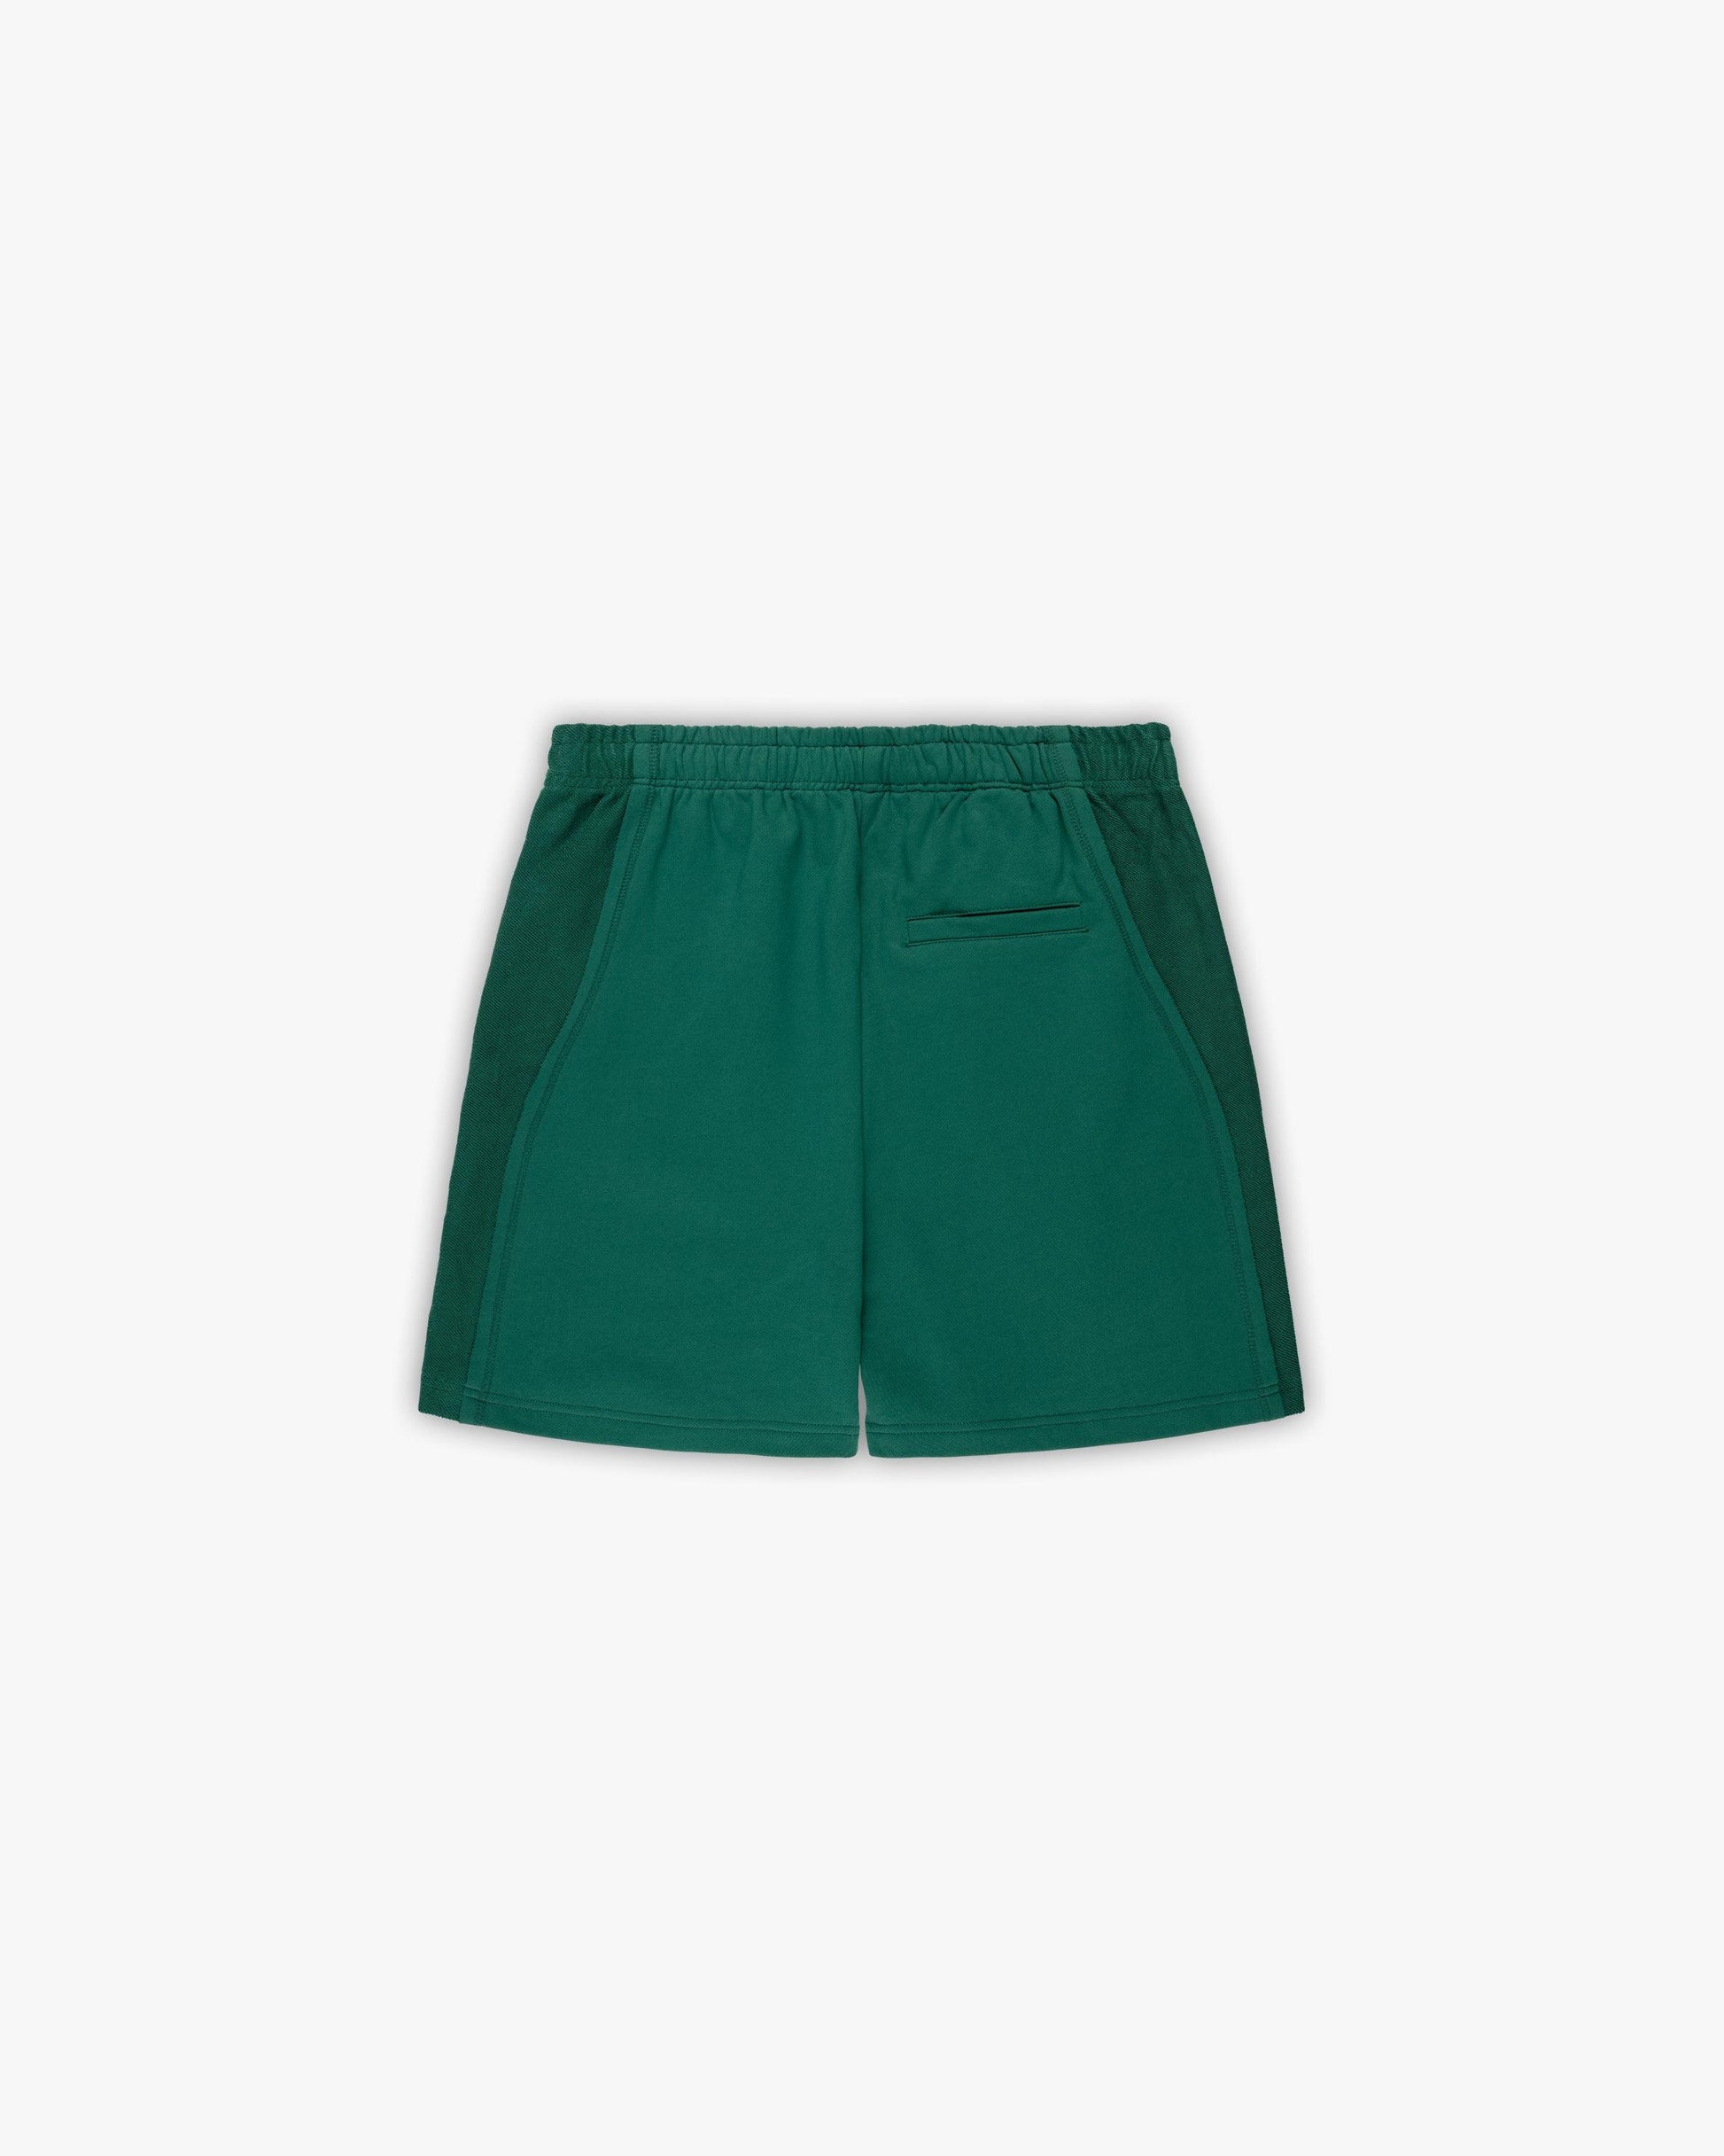 INSIDE OUT SHORTS FORREST GREEN - VICINITY